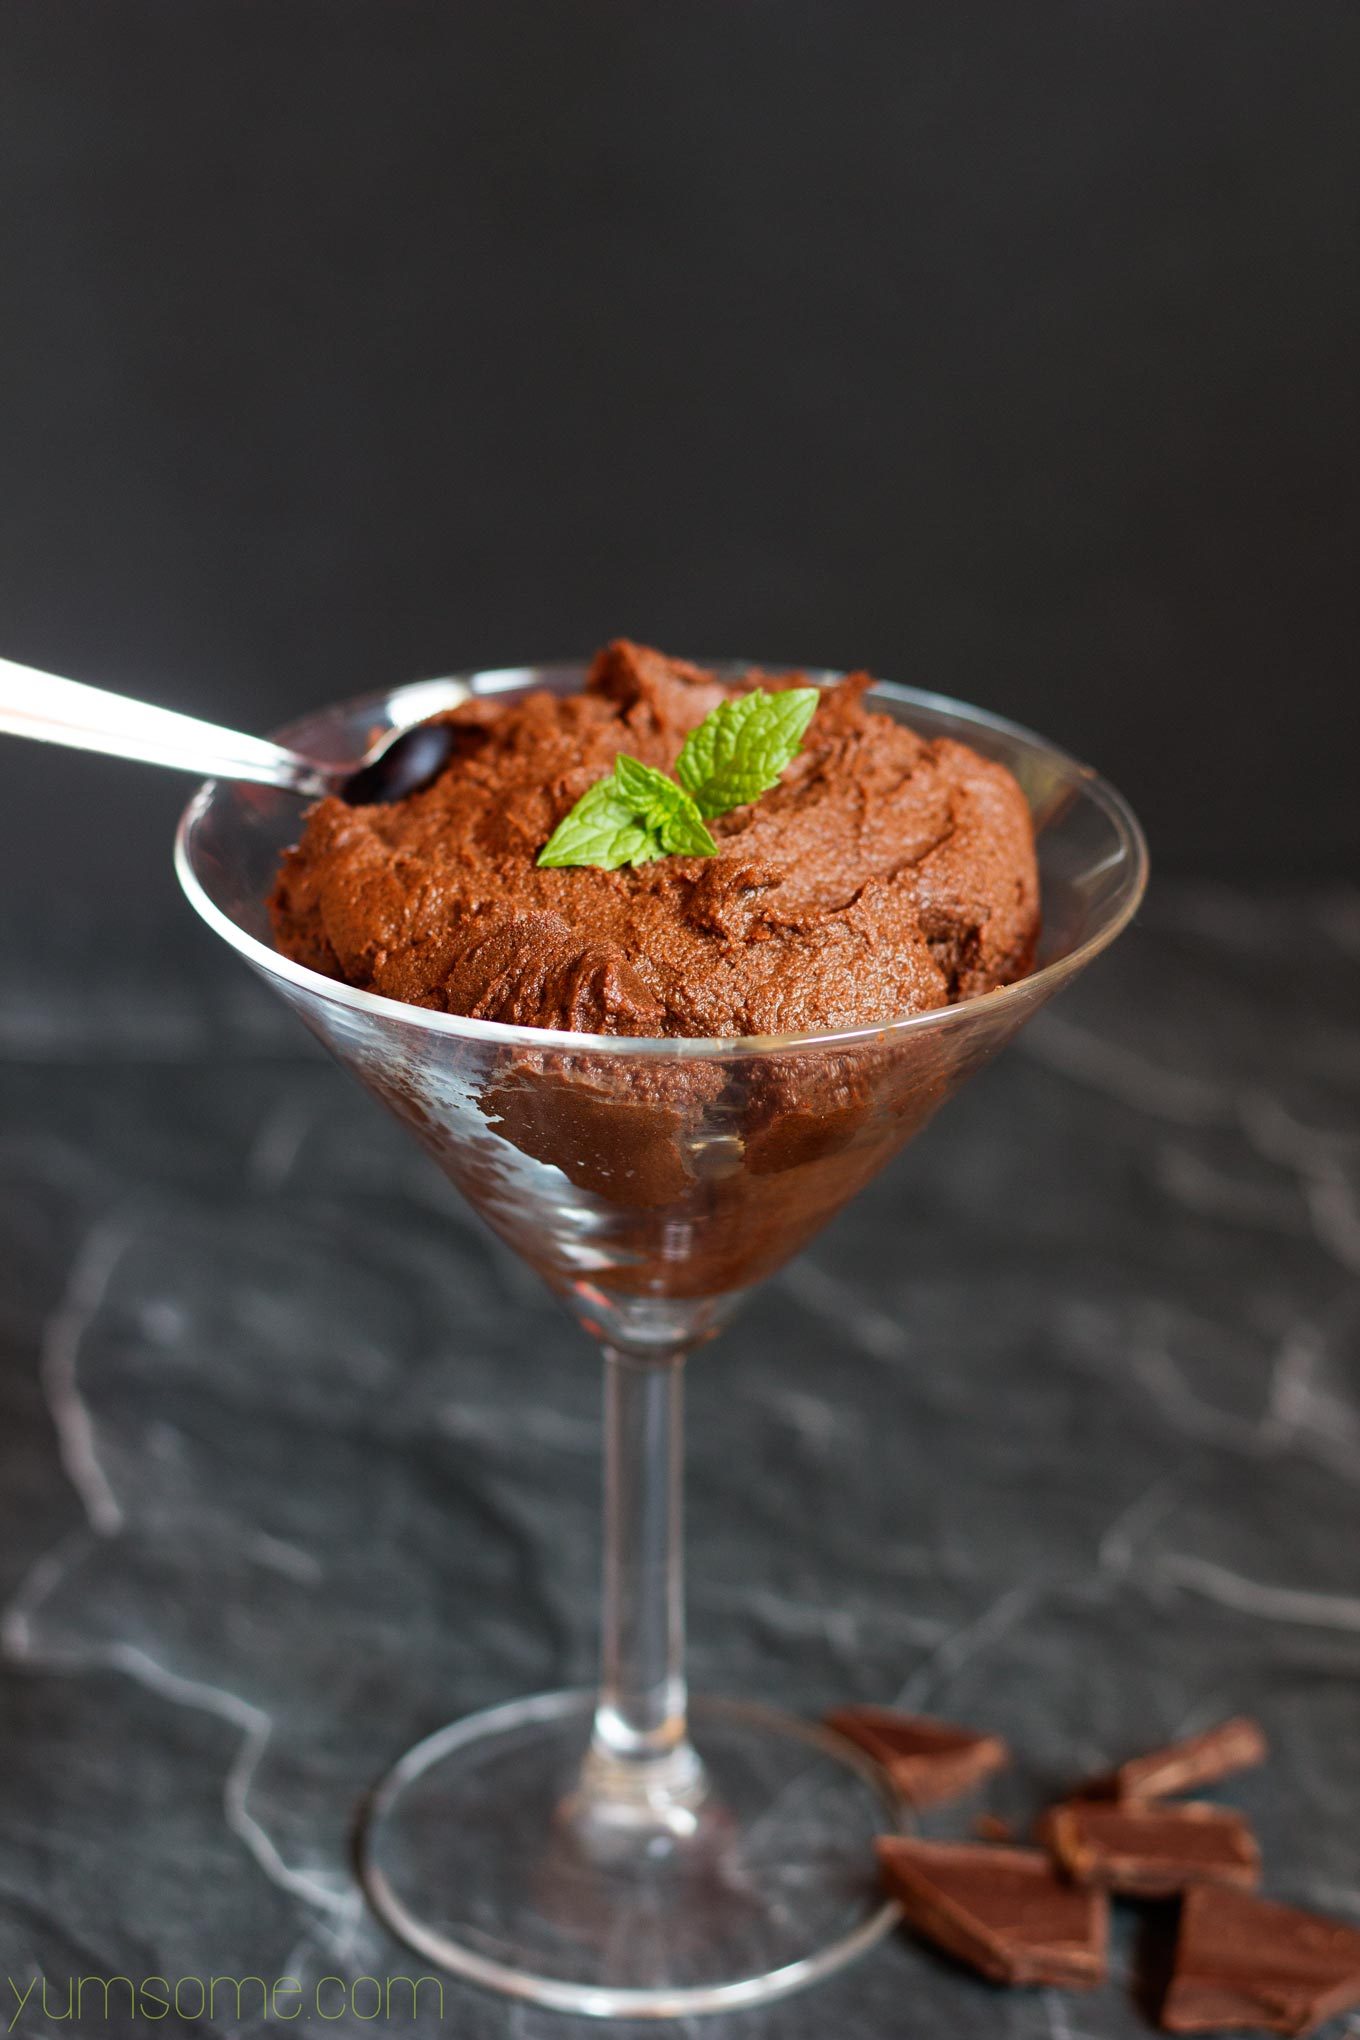 A cocktail glass containing vegan chocolate maple pudding, against a dark background.